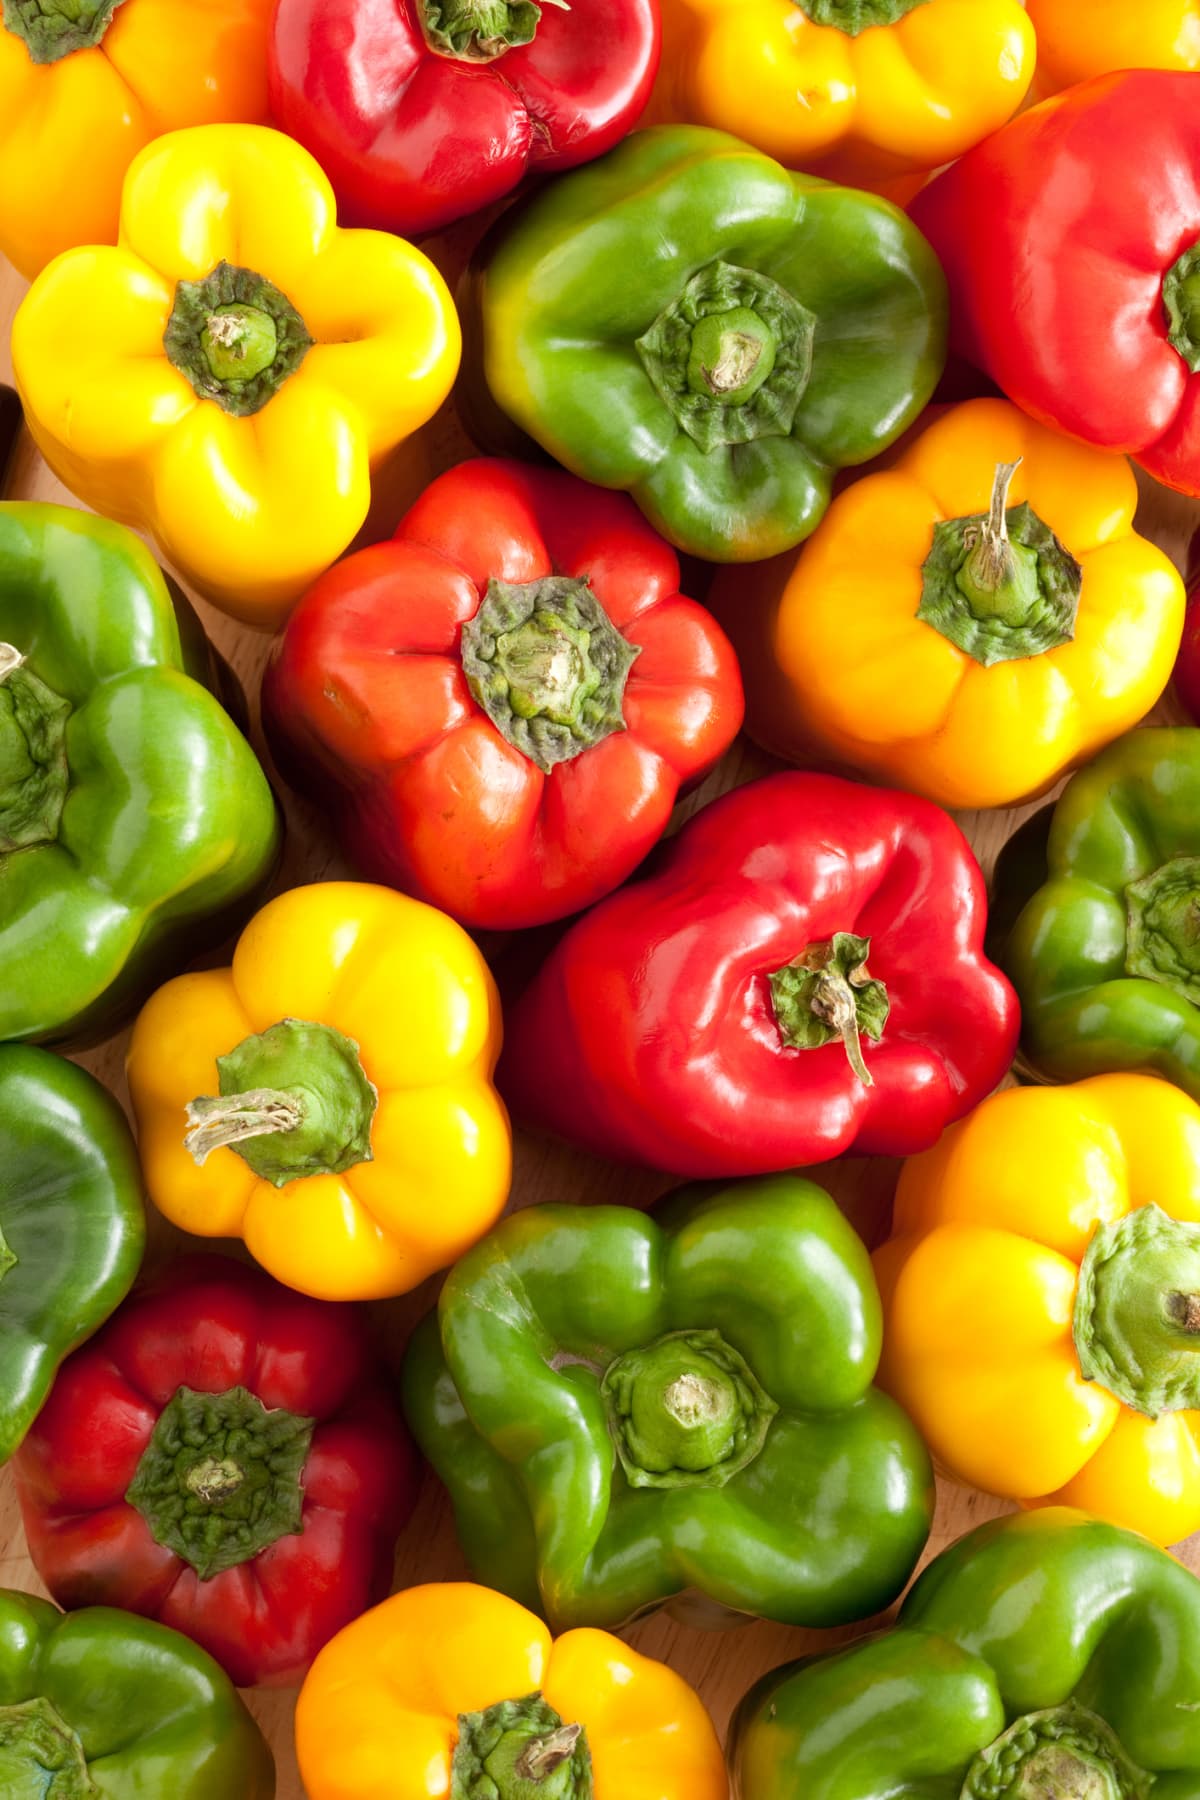 Overhead view of yellow, red, and green bell peppers